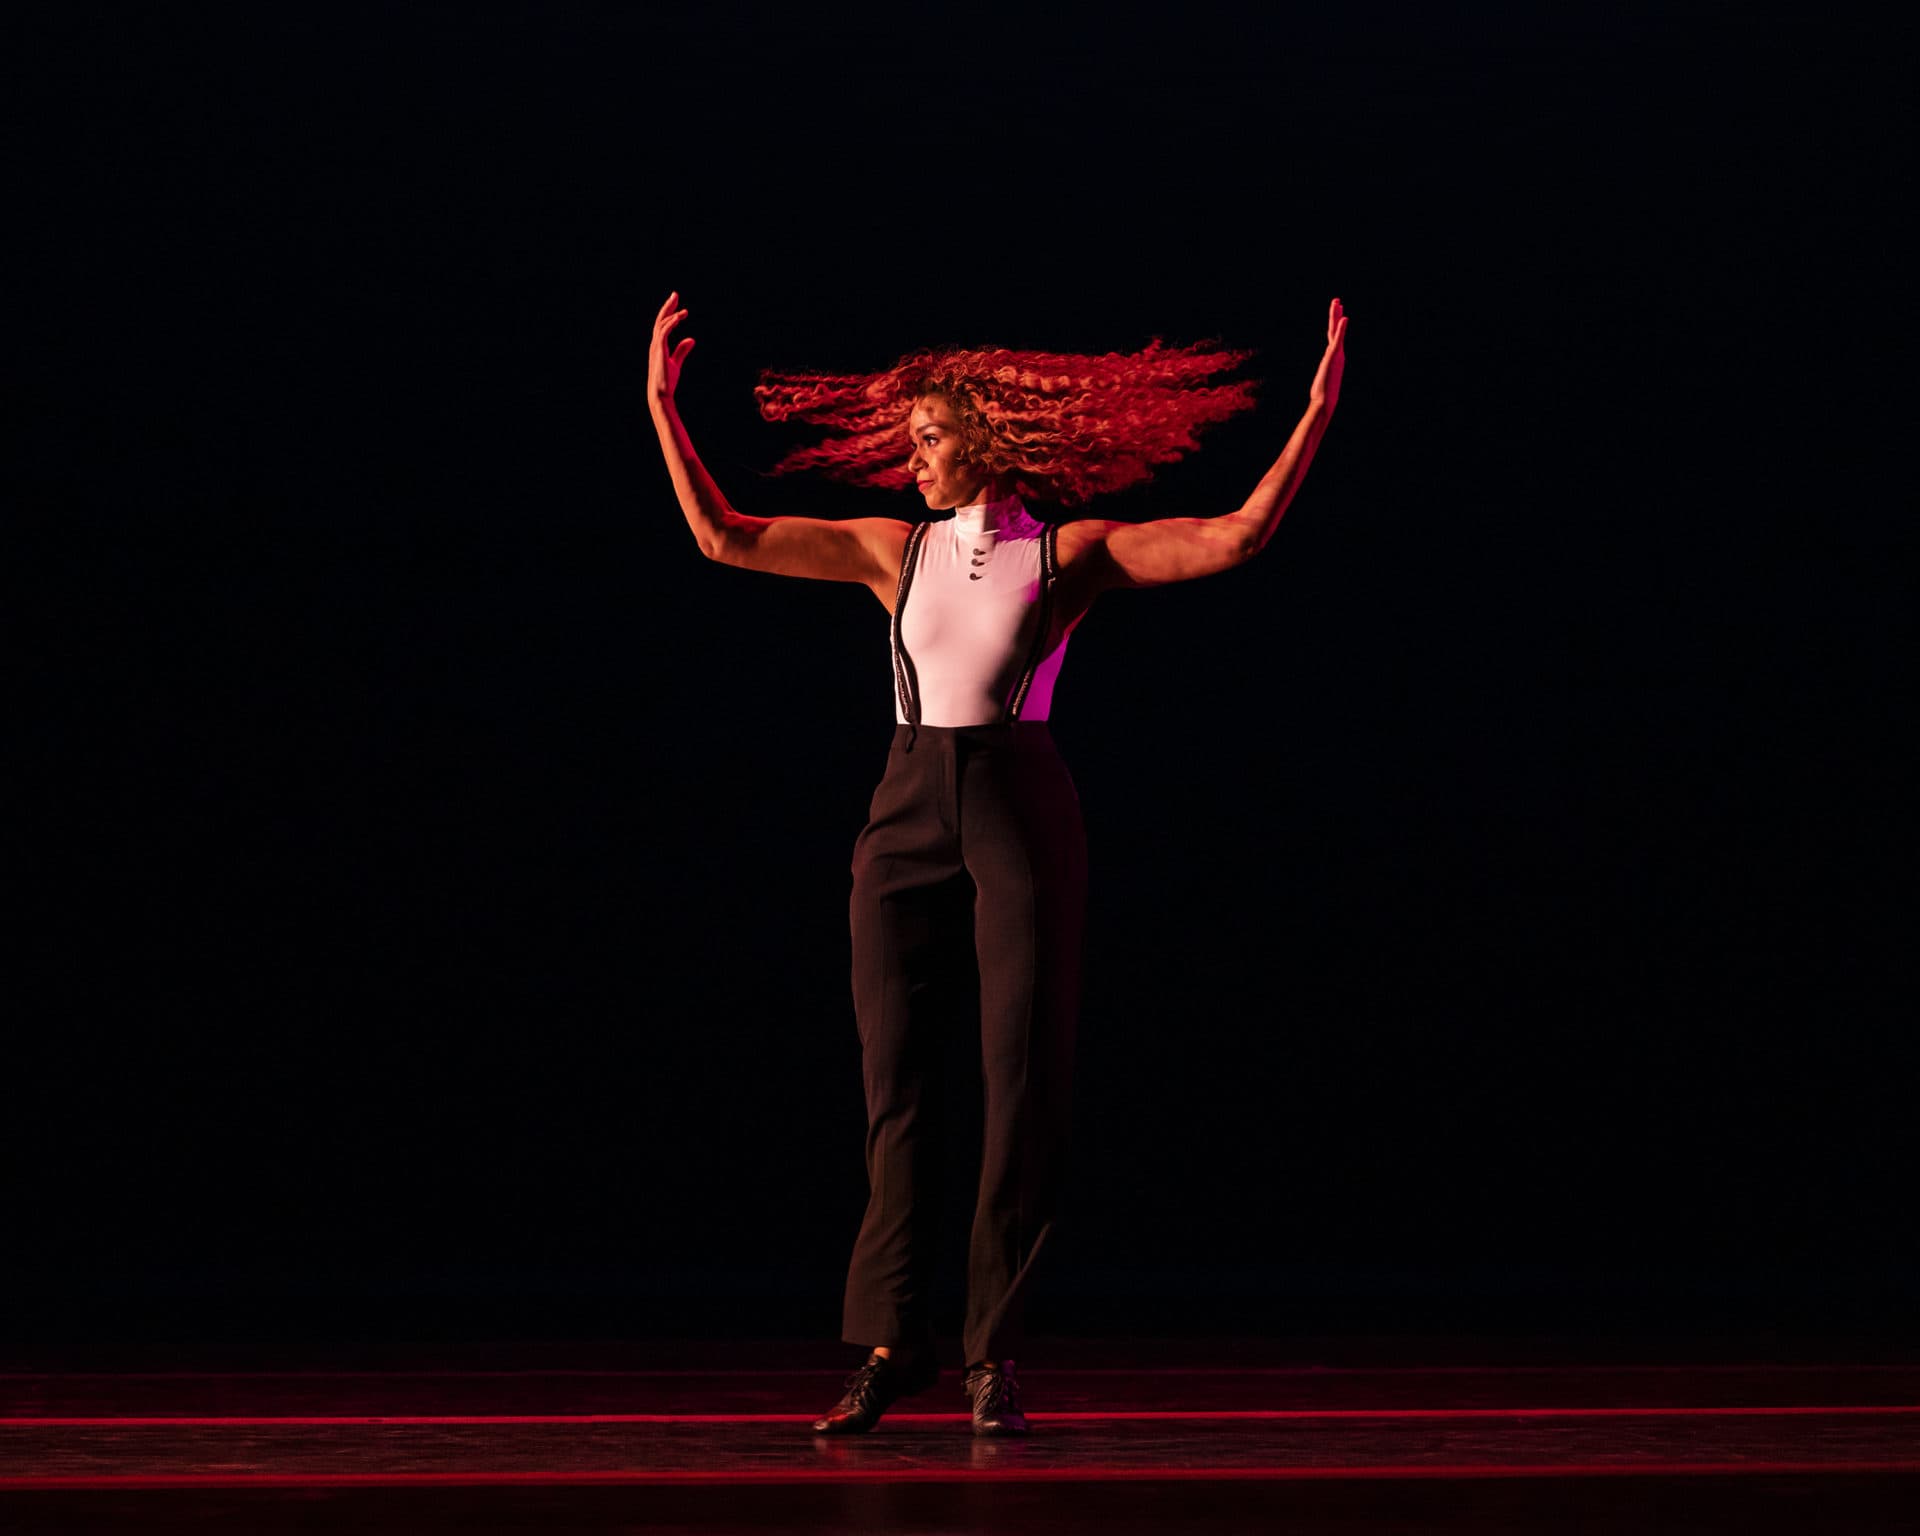 Alvin Ailey American Dance Theater's Belén Indhira Pereyra in Robert Battle's For Four, stage premiere. (Courtesy Paul Kolnik)